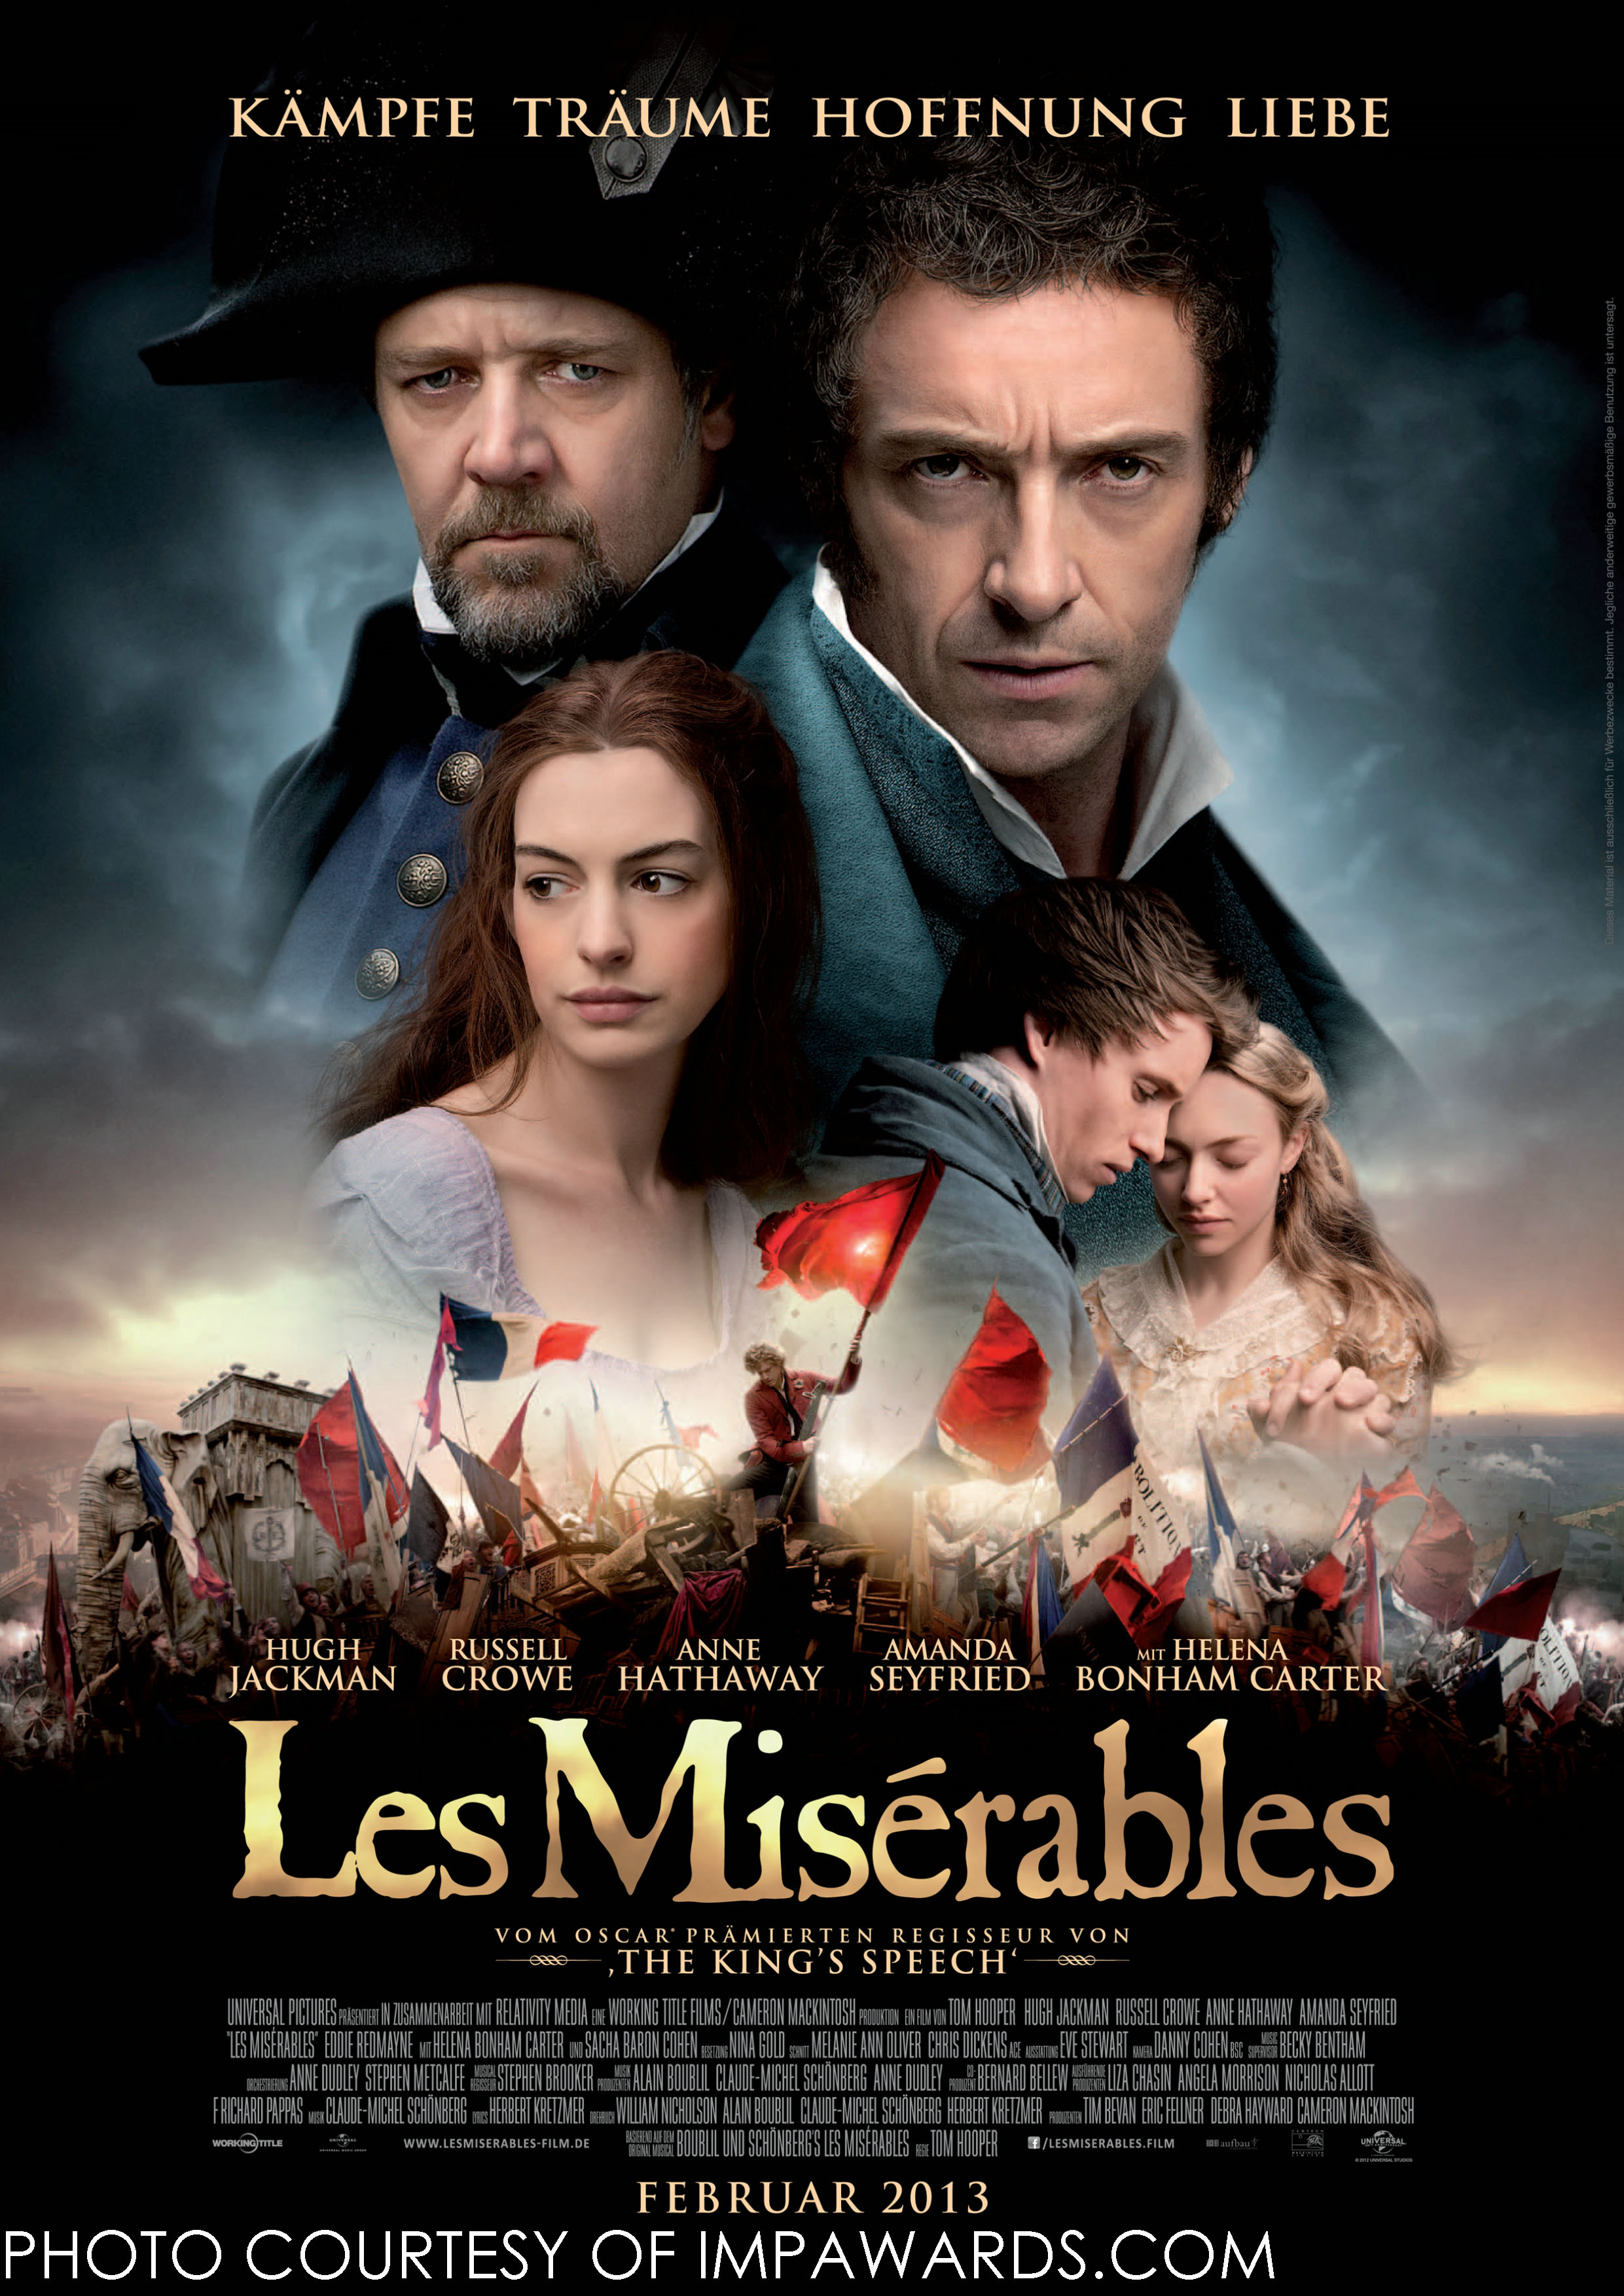 Les Miserables: the best movie in theaters - The Mycenaean2481 x 3508